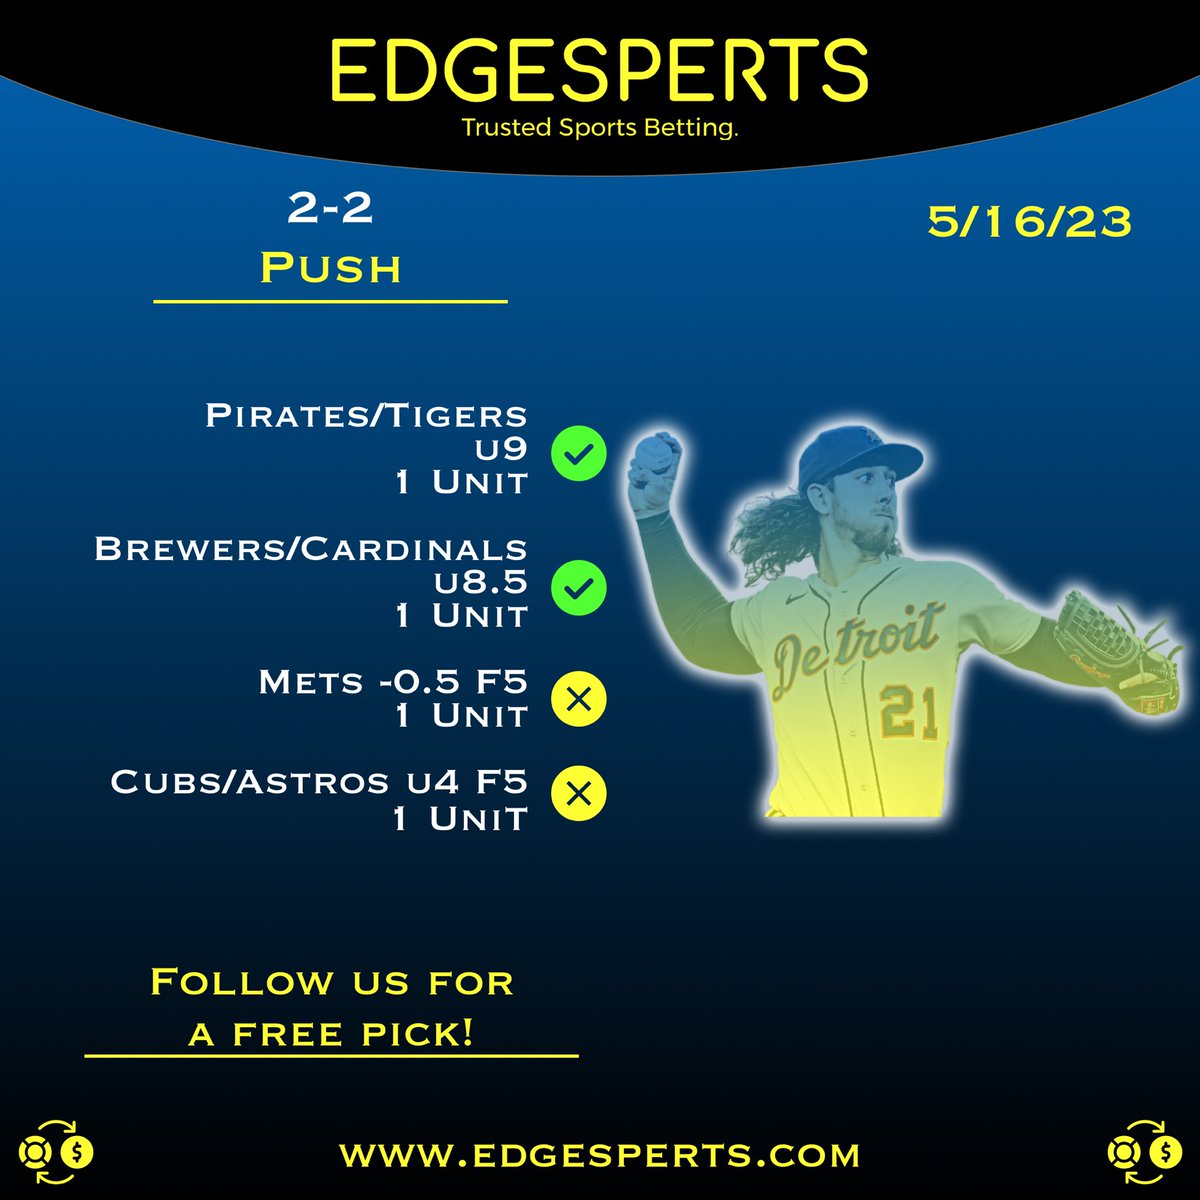 An even 2-2 push day for the EdgeSperts team. We will be back at it tonight for more MLB and NBA action 🫡  #GamblingTwitter #SportsBettingResults #WinningBets #BettingWins #CashOut #BettingResults #SportsbookWins #ProfitableBets #BetWinRepeat #BettingSuccess #SportsGambling